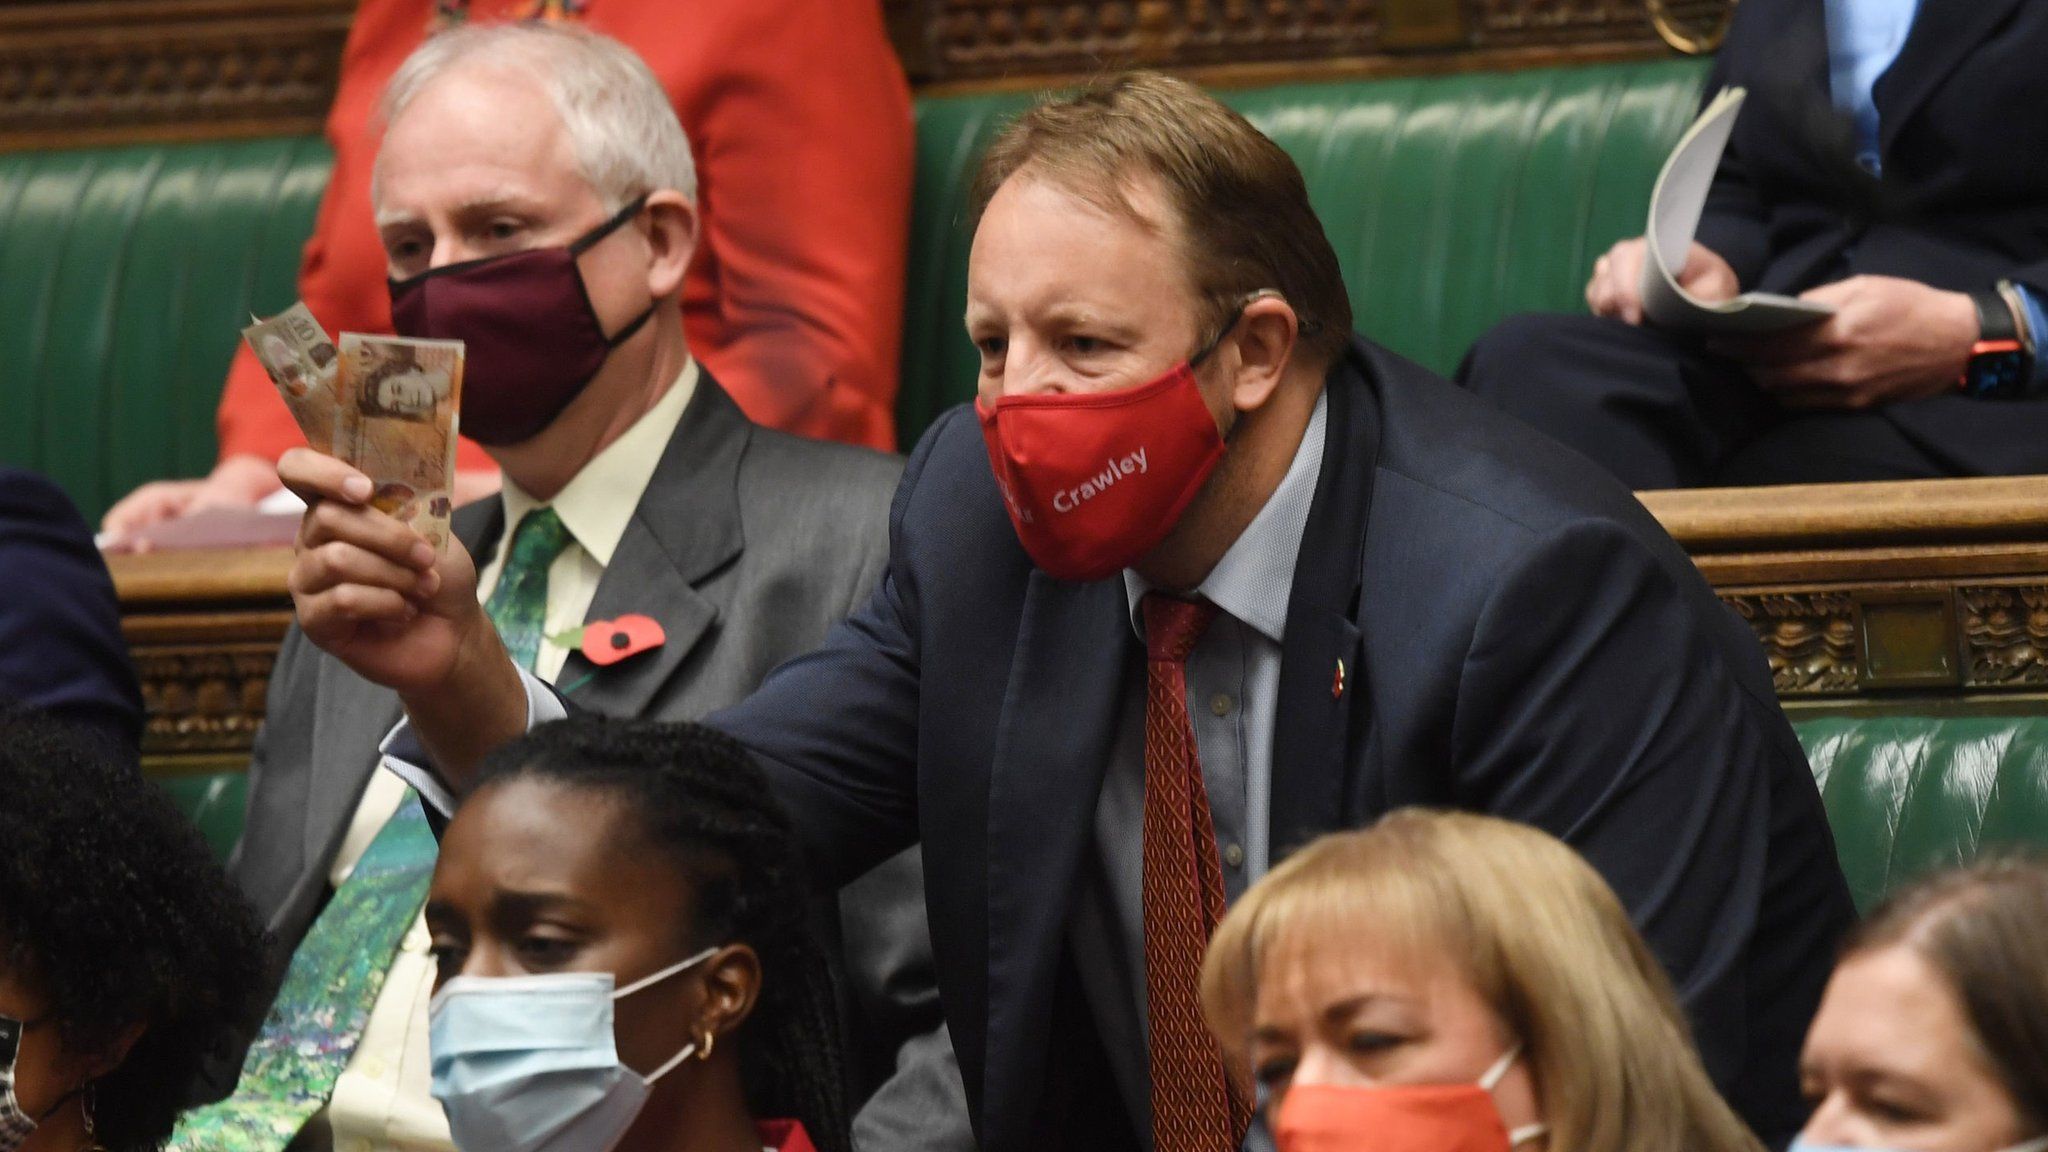 MPs have expressed their anger over lobbying